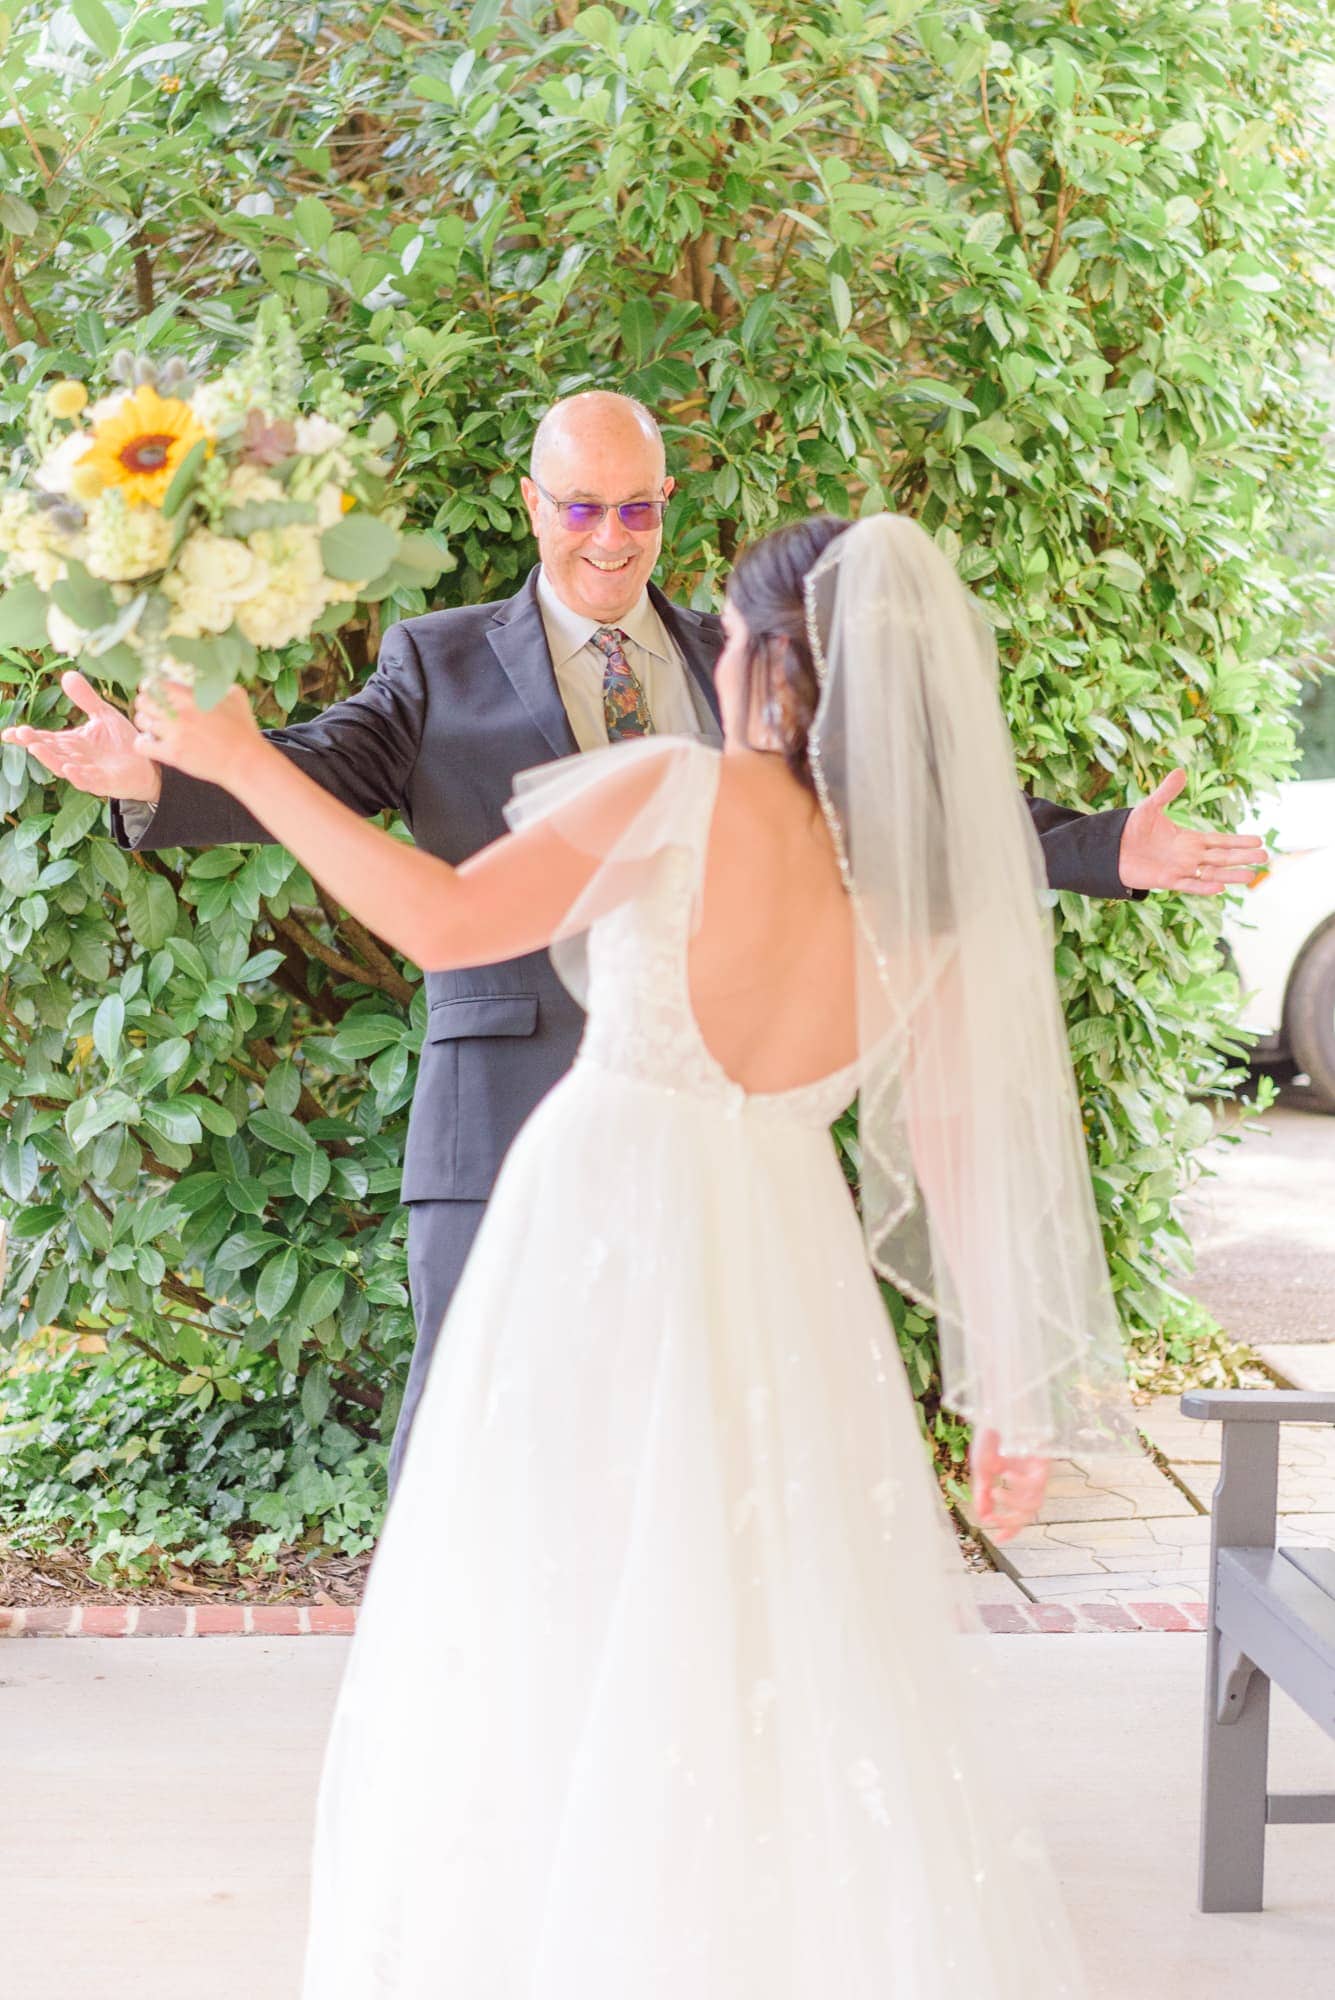 Dad sees his daughter as a bride for the first time at Alexander Homestead and a big smile breaks across his face.